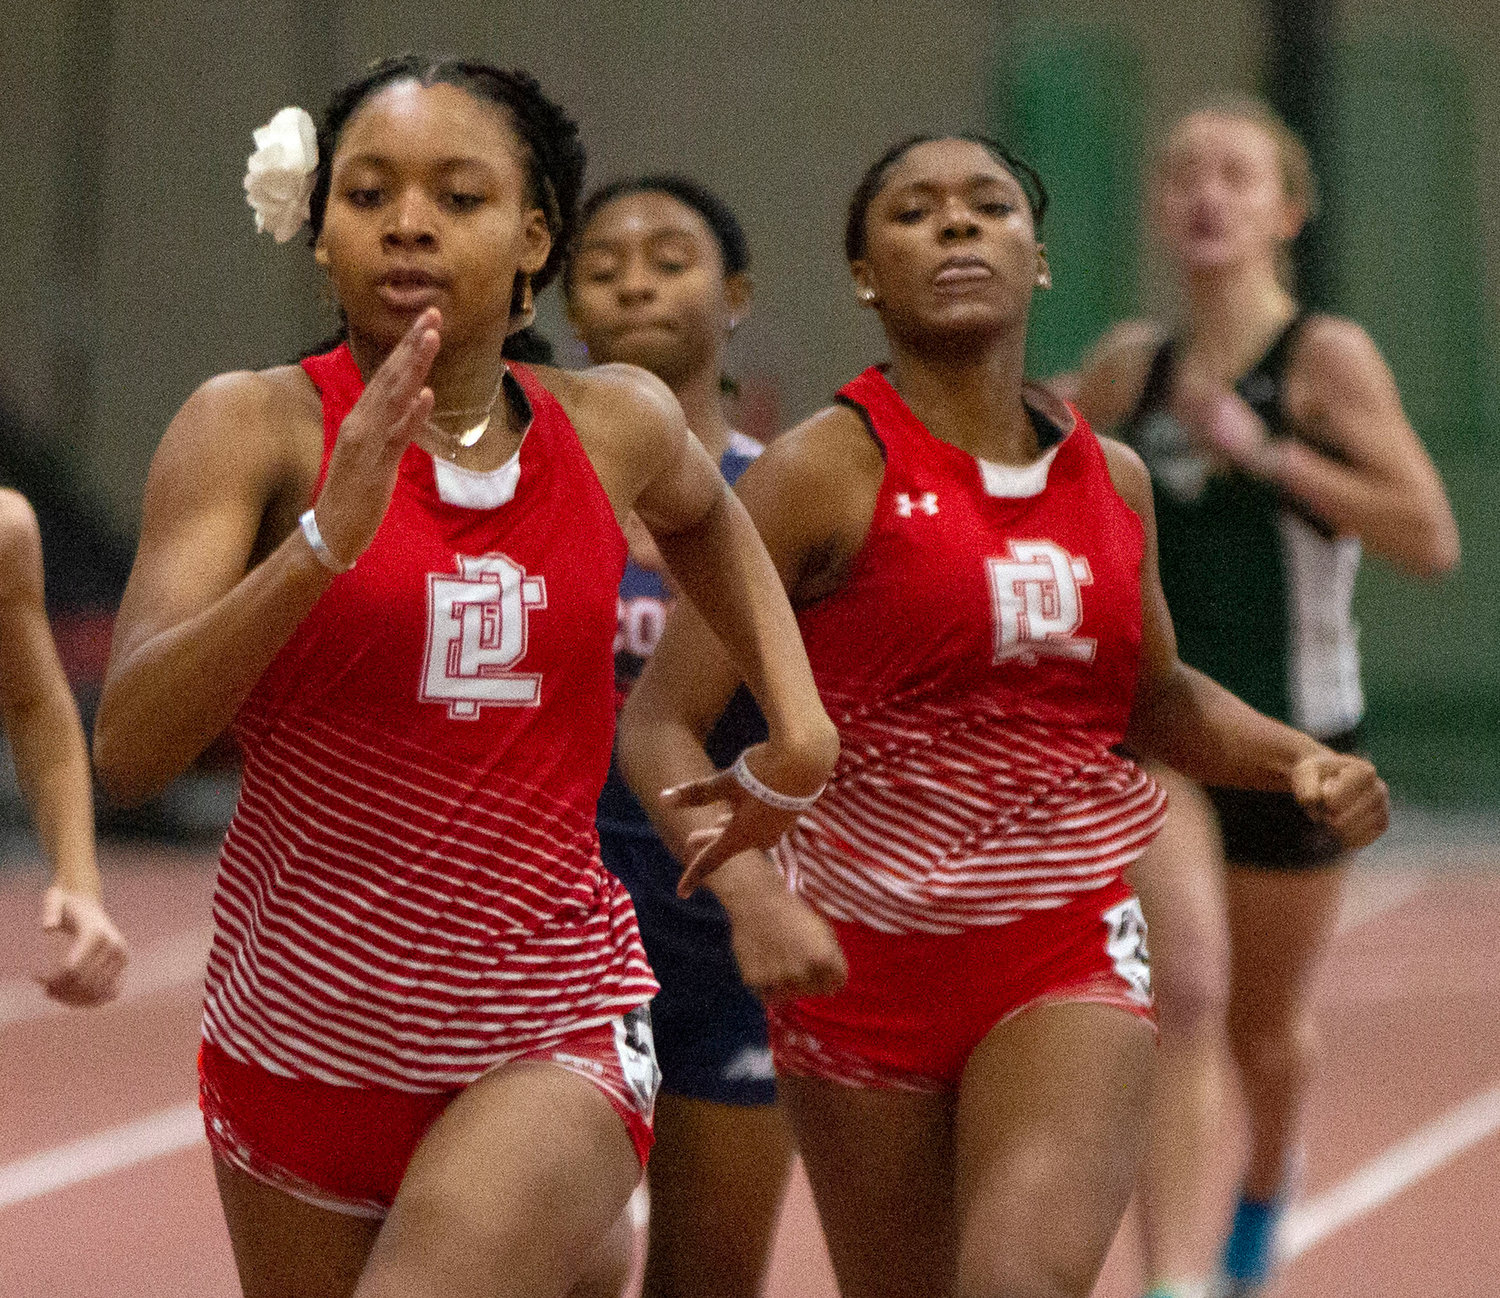 East Providence High School's Nazarae Phillip, at left and en route to winning the 300 meters in a regular season meet earlier this winter just ahead of teammate Kandace Daniel, captured that event and the 55 dash last week during the Sullivan Division championship meet.